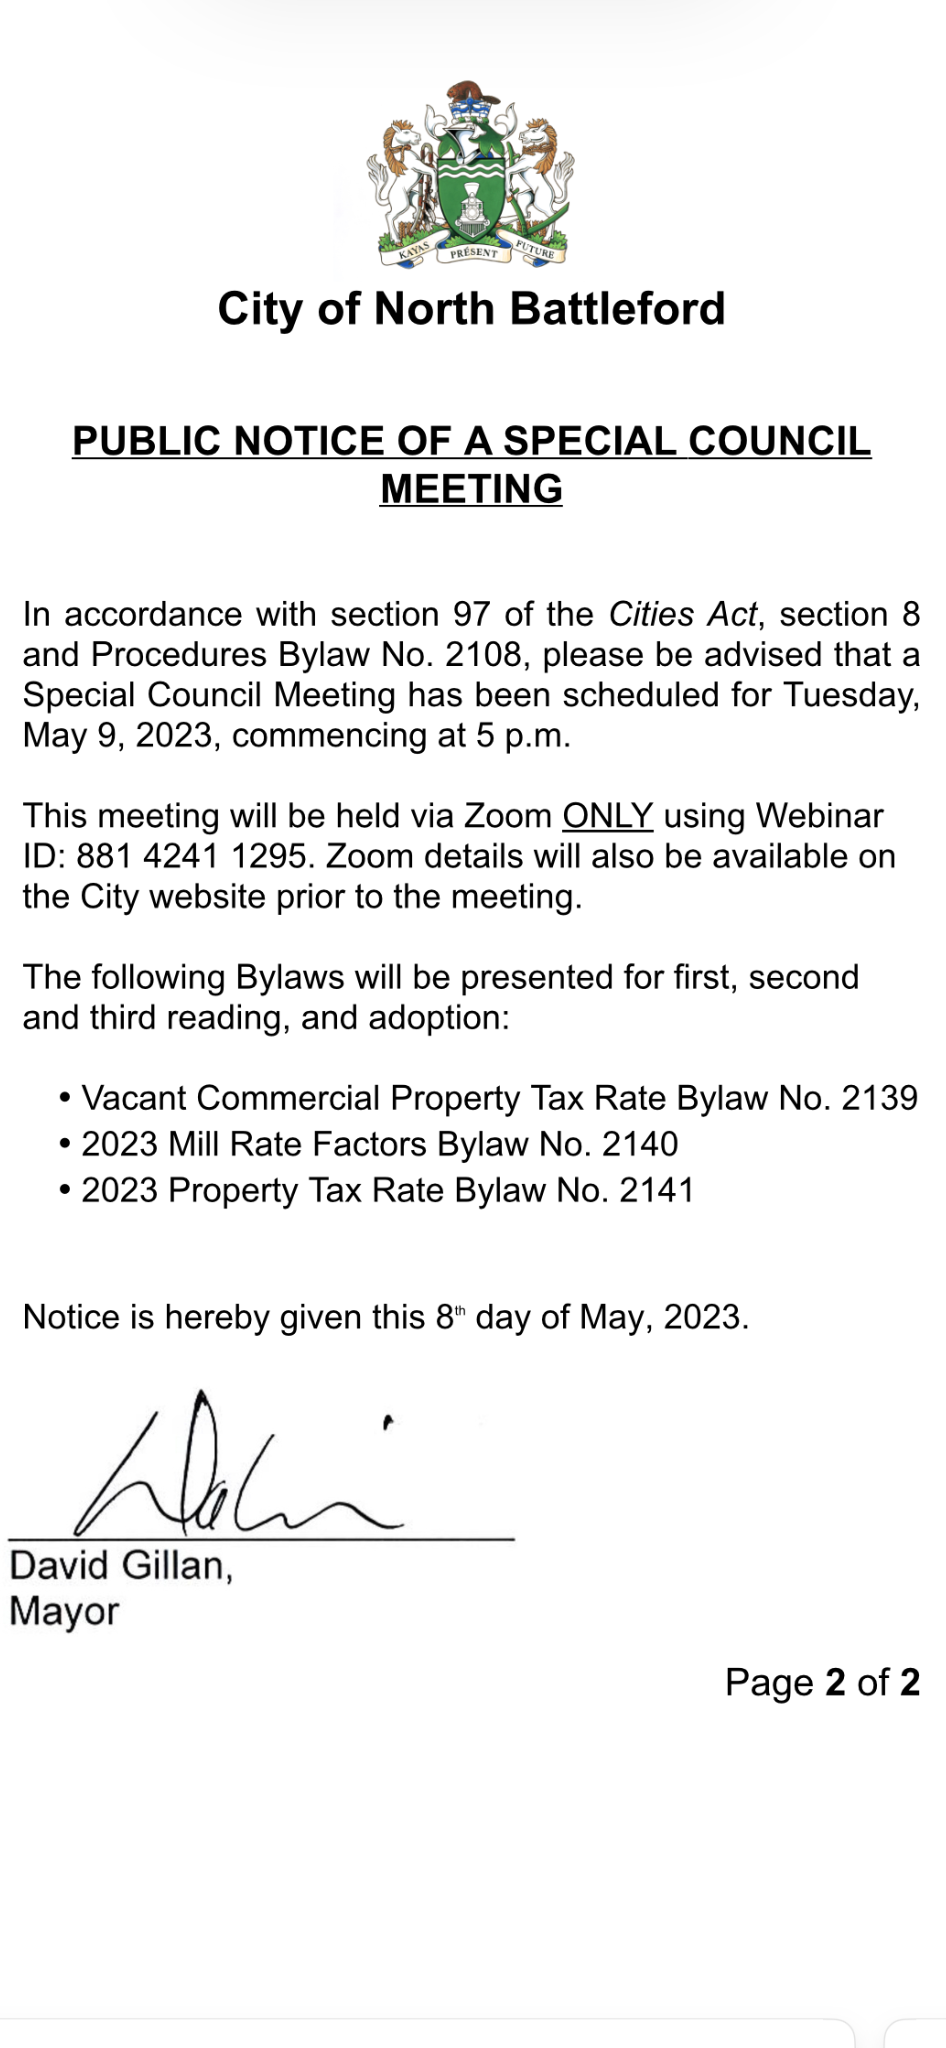 Image of Notice of Special Council Meeting - May 9, 2023